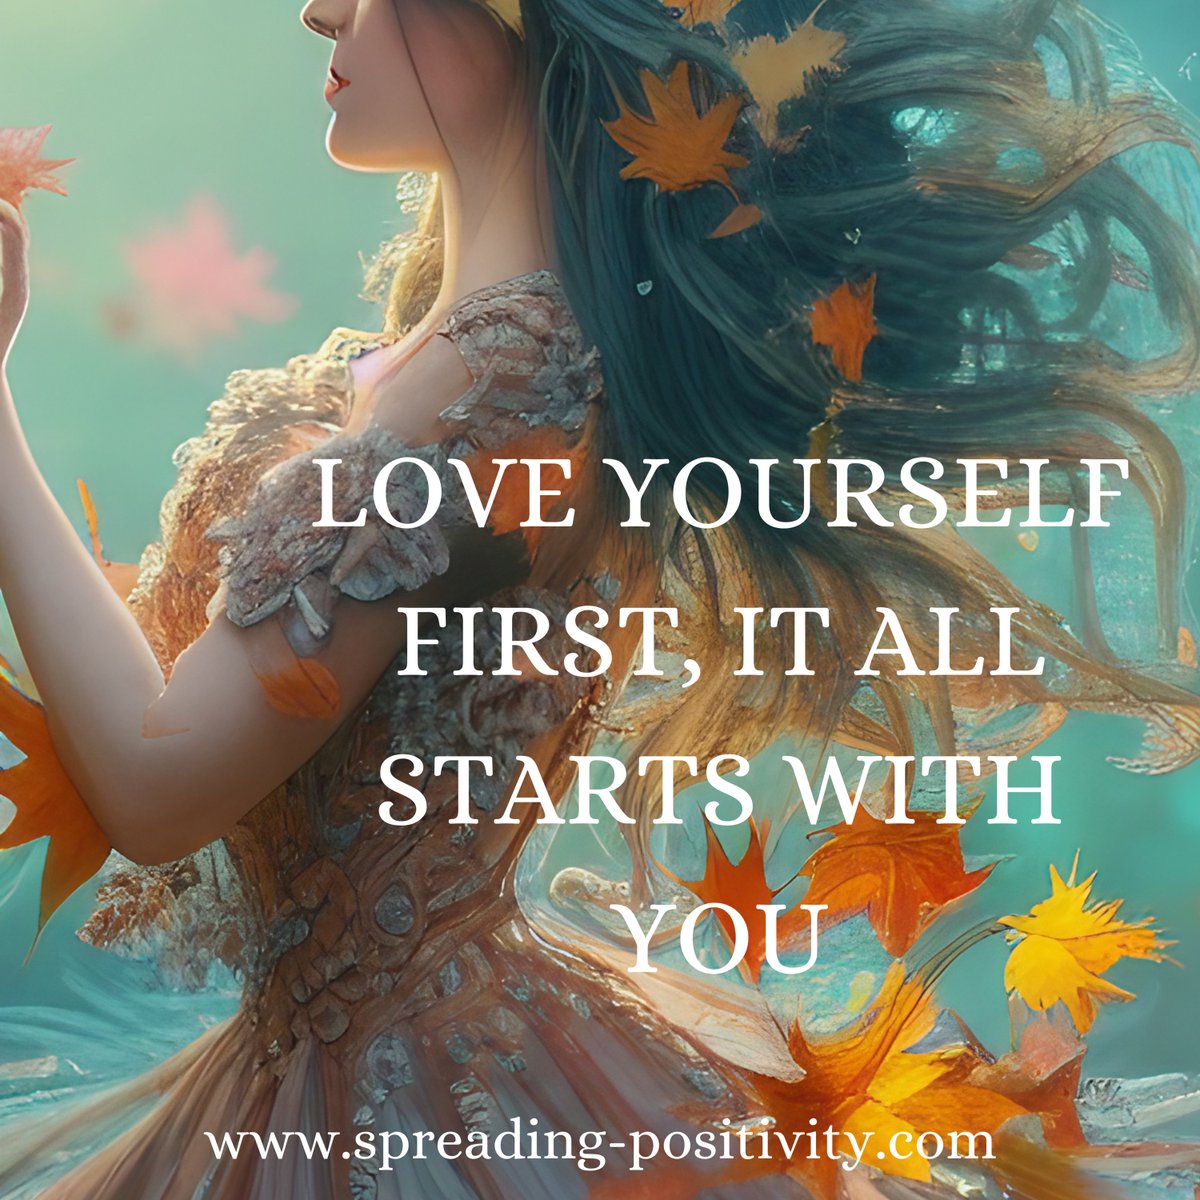 Here's a friendly reminder to always take care of yourself
#SelfLove #LoveYourself #LoveYouFirst #ItAllStartsWithYou #ChooseSelfLove #PrioritizeYourself #BeGoodToYou #TakeCareOfYou